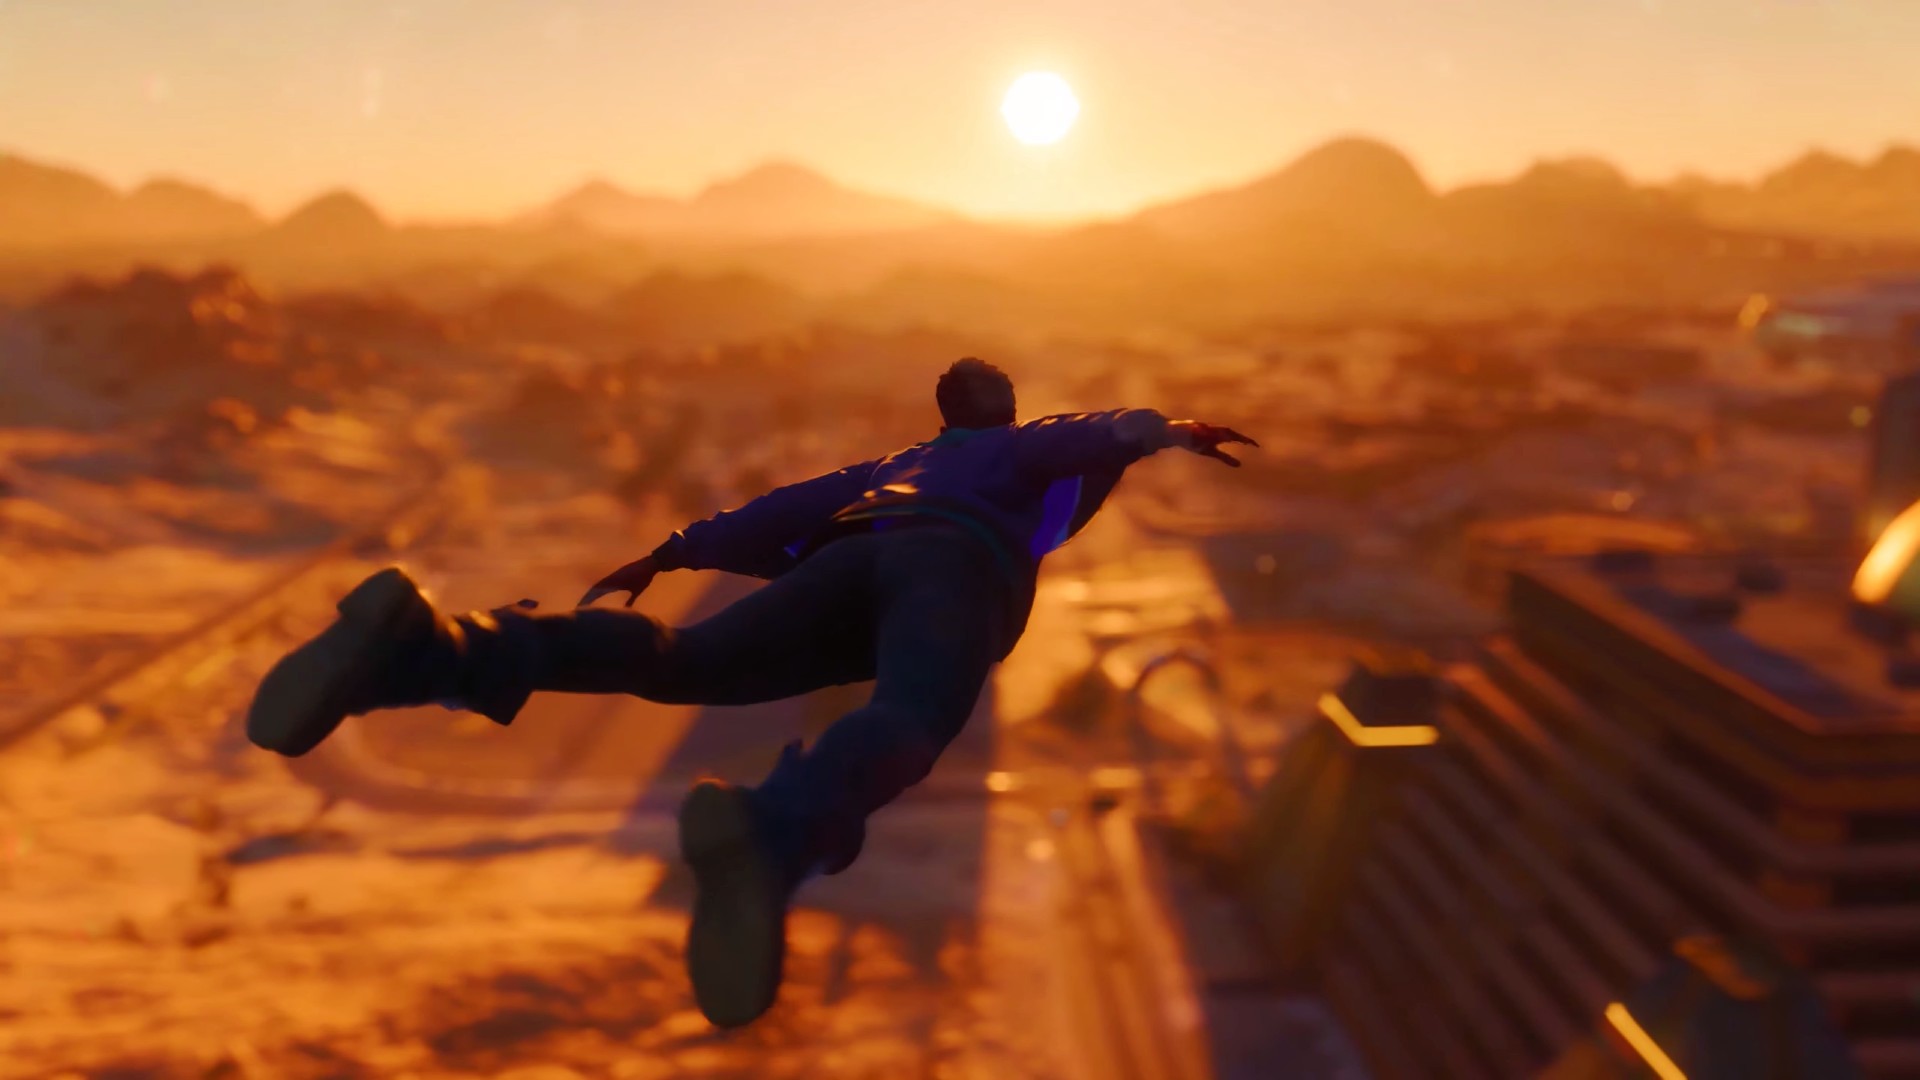 How To Get The Wingsuit In Saints Row